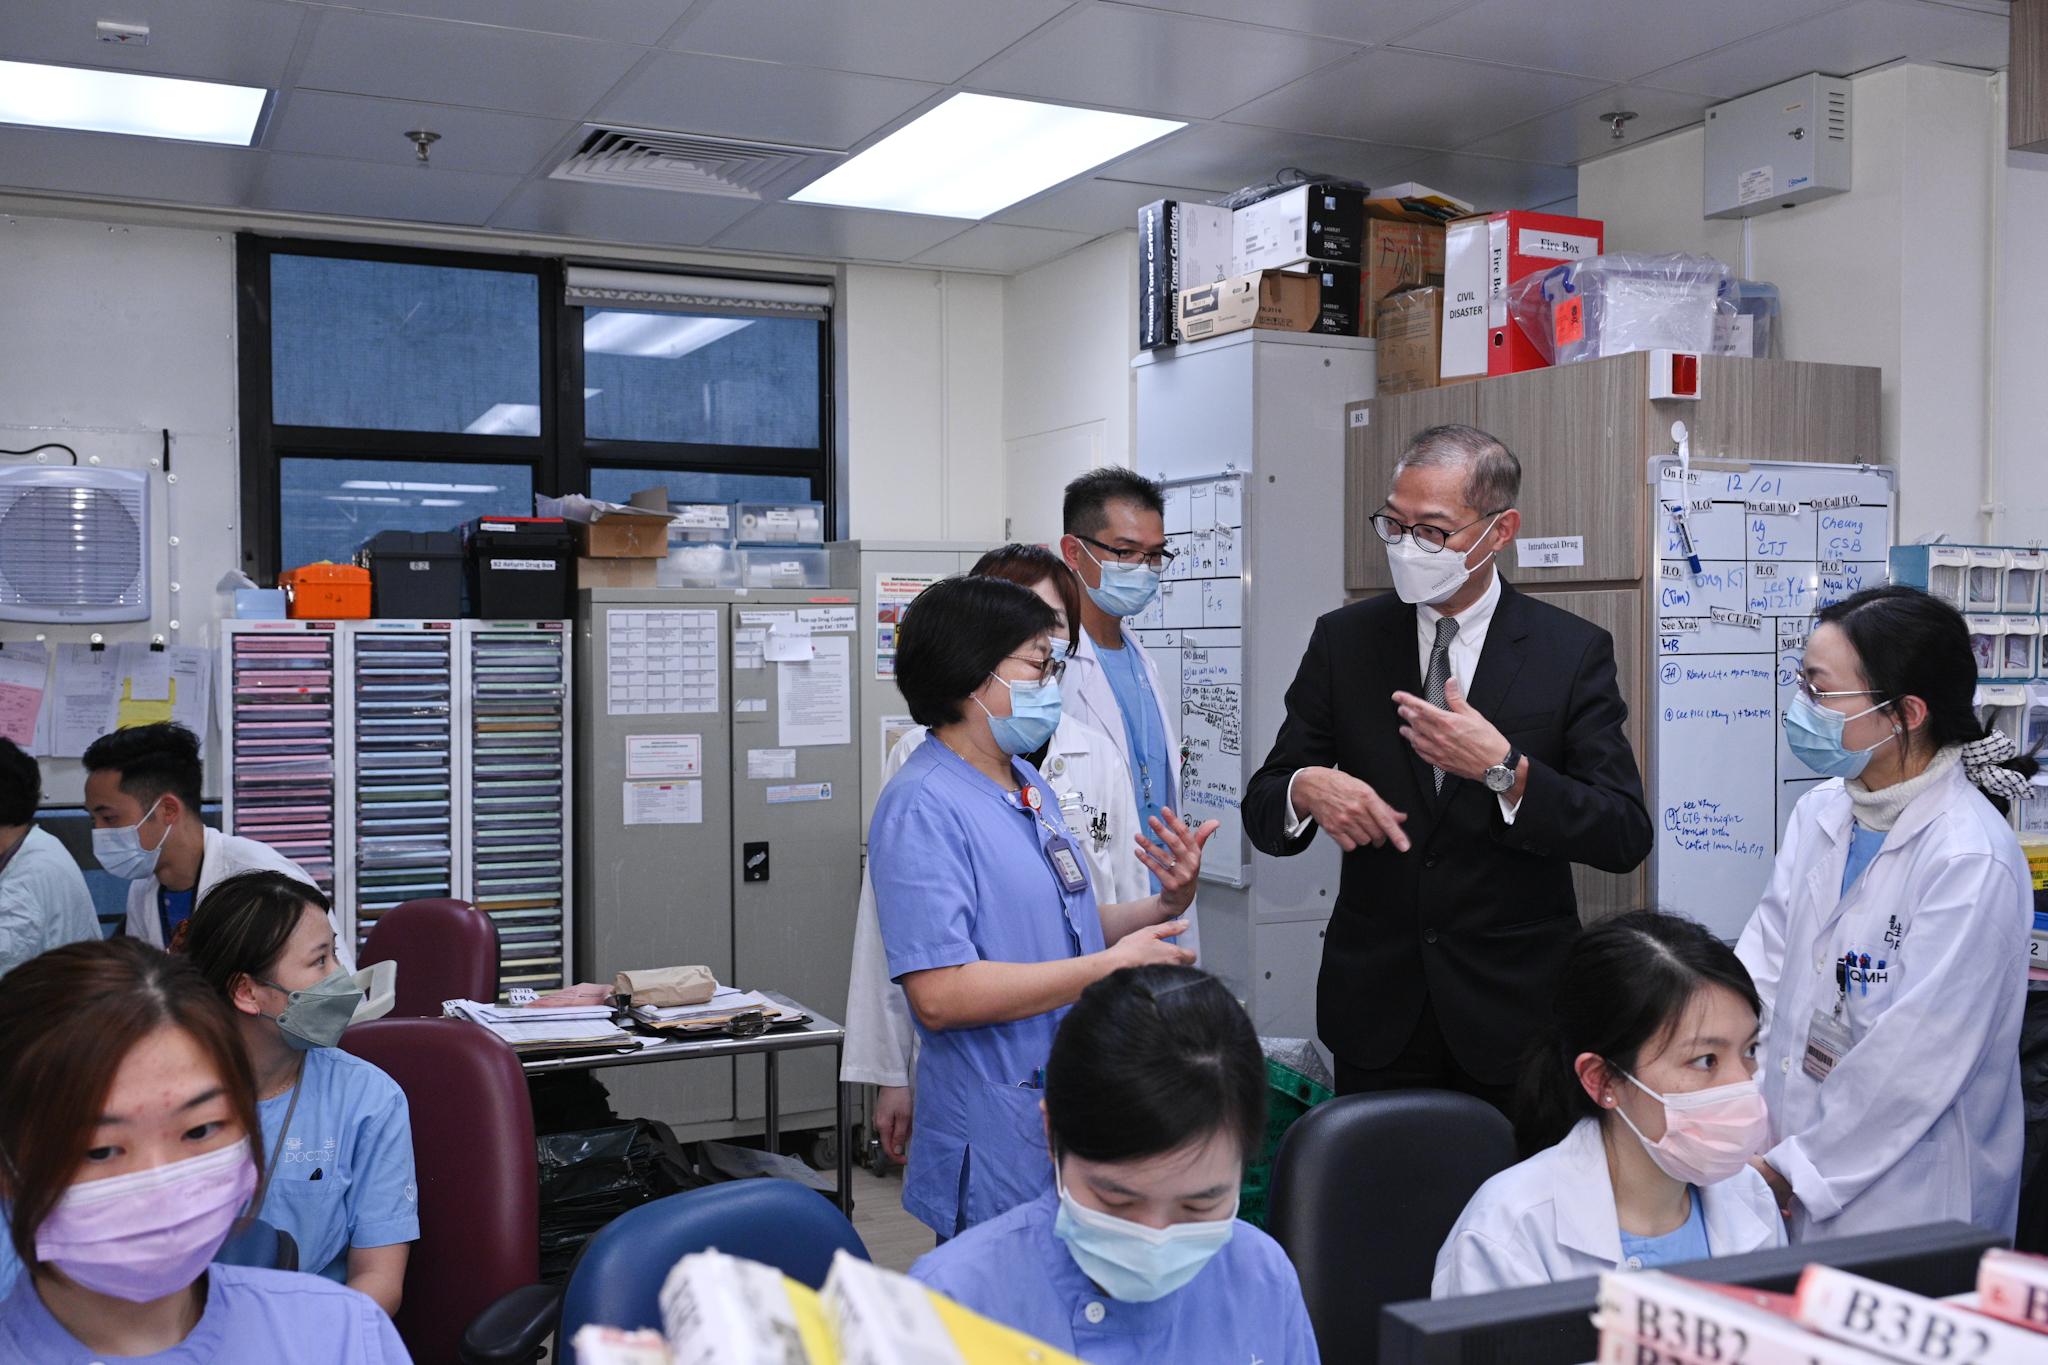 The Secretary for Health, Professor Lo Chung-mau, visited Queen Mary Hospital today (January 13). Photo shows Professor Lo (second right) receiving a briefing by frontline healthcare staff on current service situation and manpower arrangements at the hospital in response to the dual challenges posed by COVID-19 and the winter influenza.